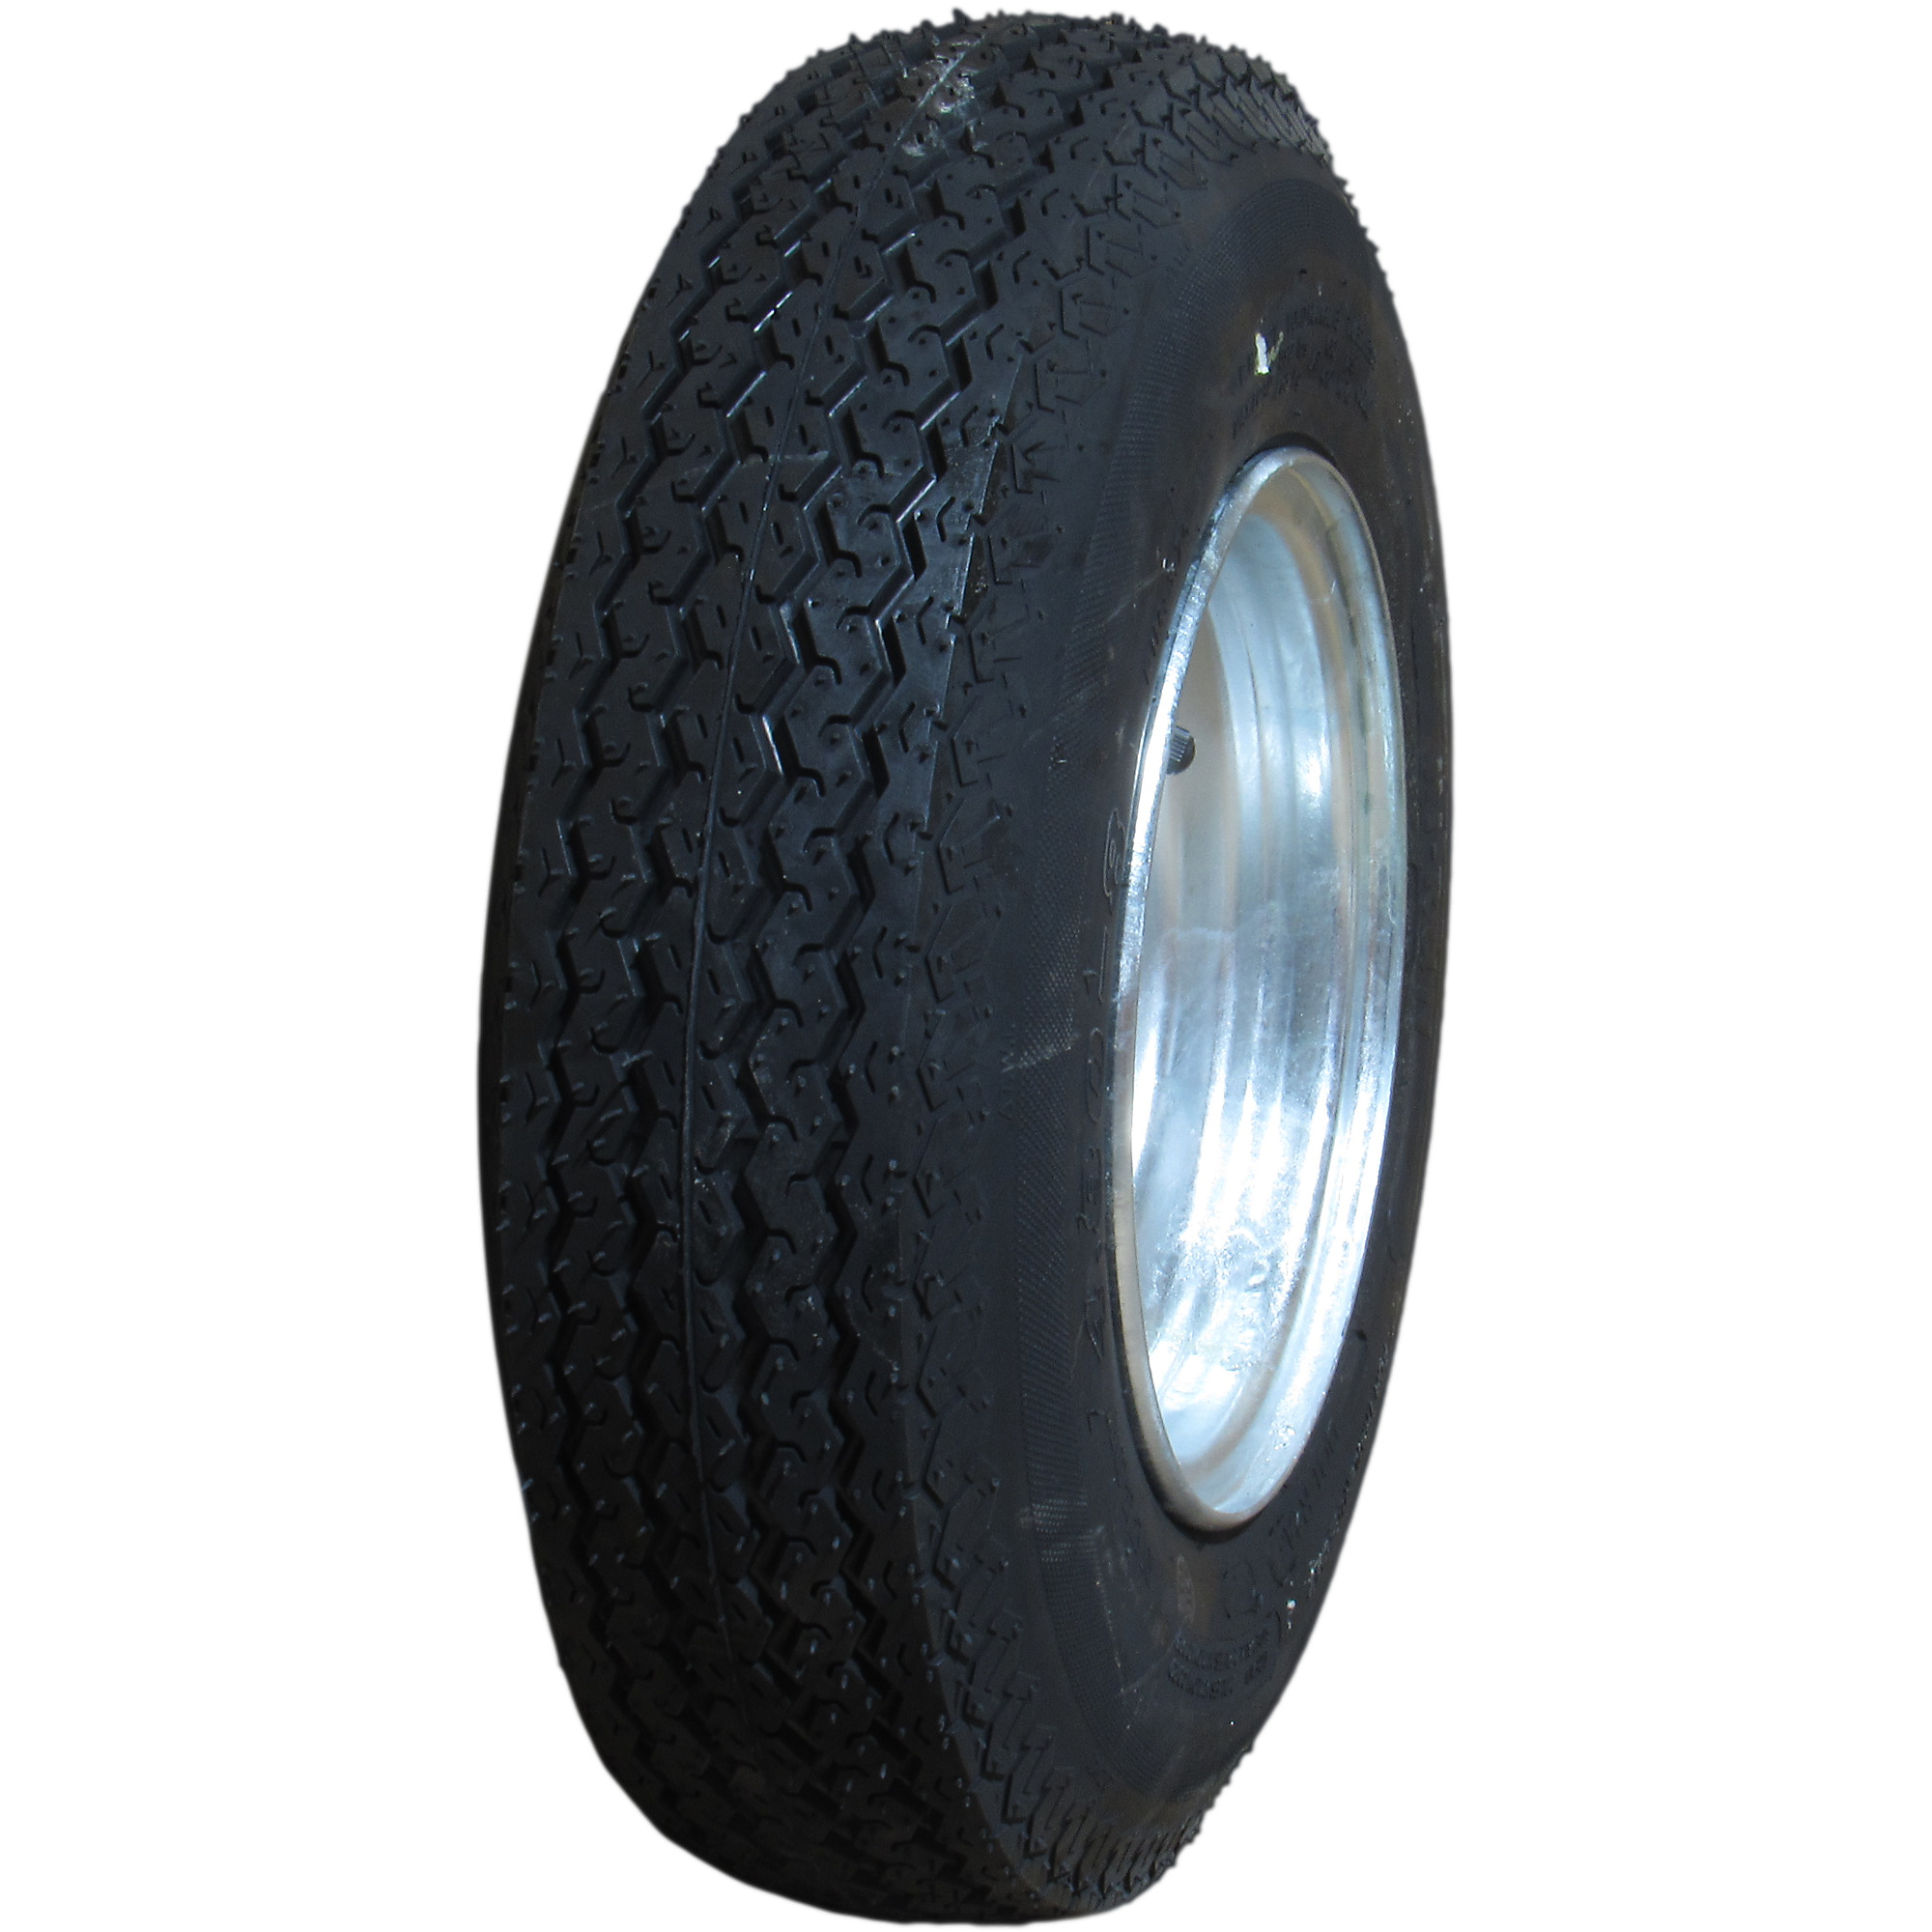 HI-RUN, Highway Trailer Tire Assembly, Galvanized, Tire Size 4.80-12 Load Range Rating B, Bolt Holes (qty.) 5 Model ASB1056